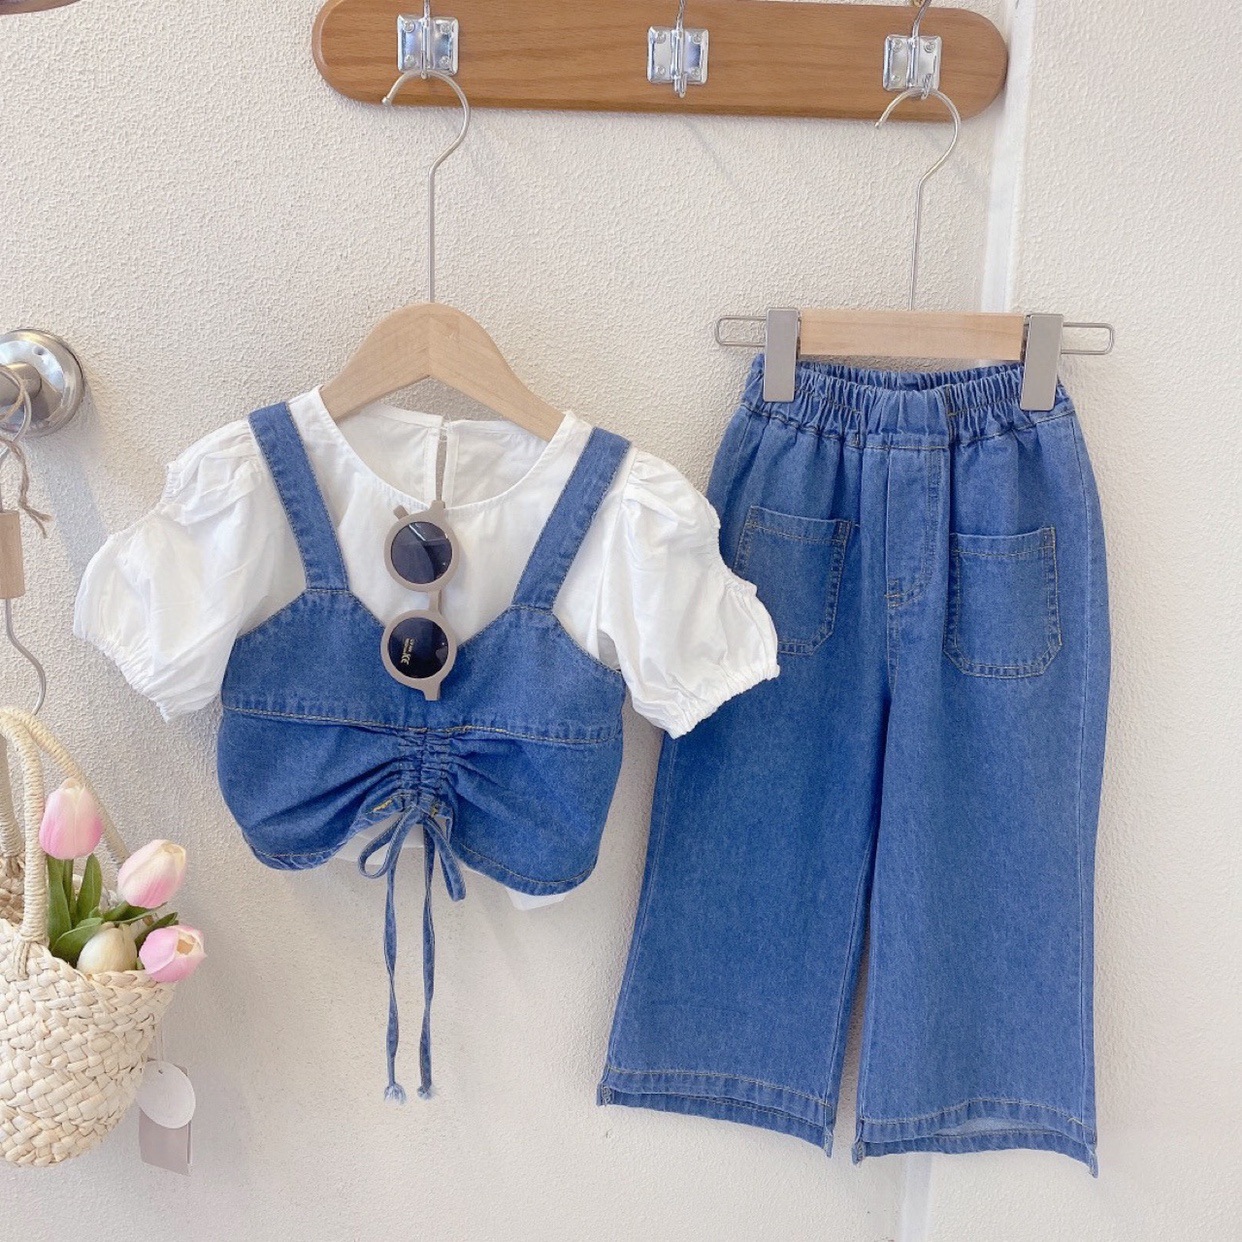 Stylish Summer Three Piece  Soft Jeans Wide Leg Pants, T-Shirt And Jeans Suspenders Set For Girls